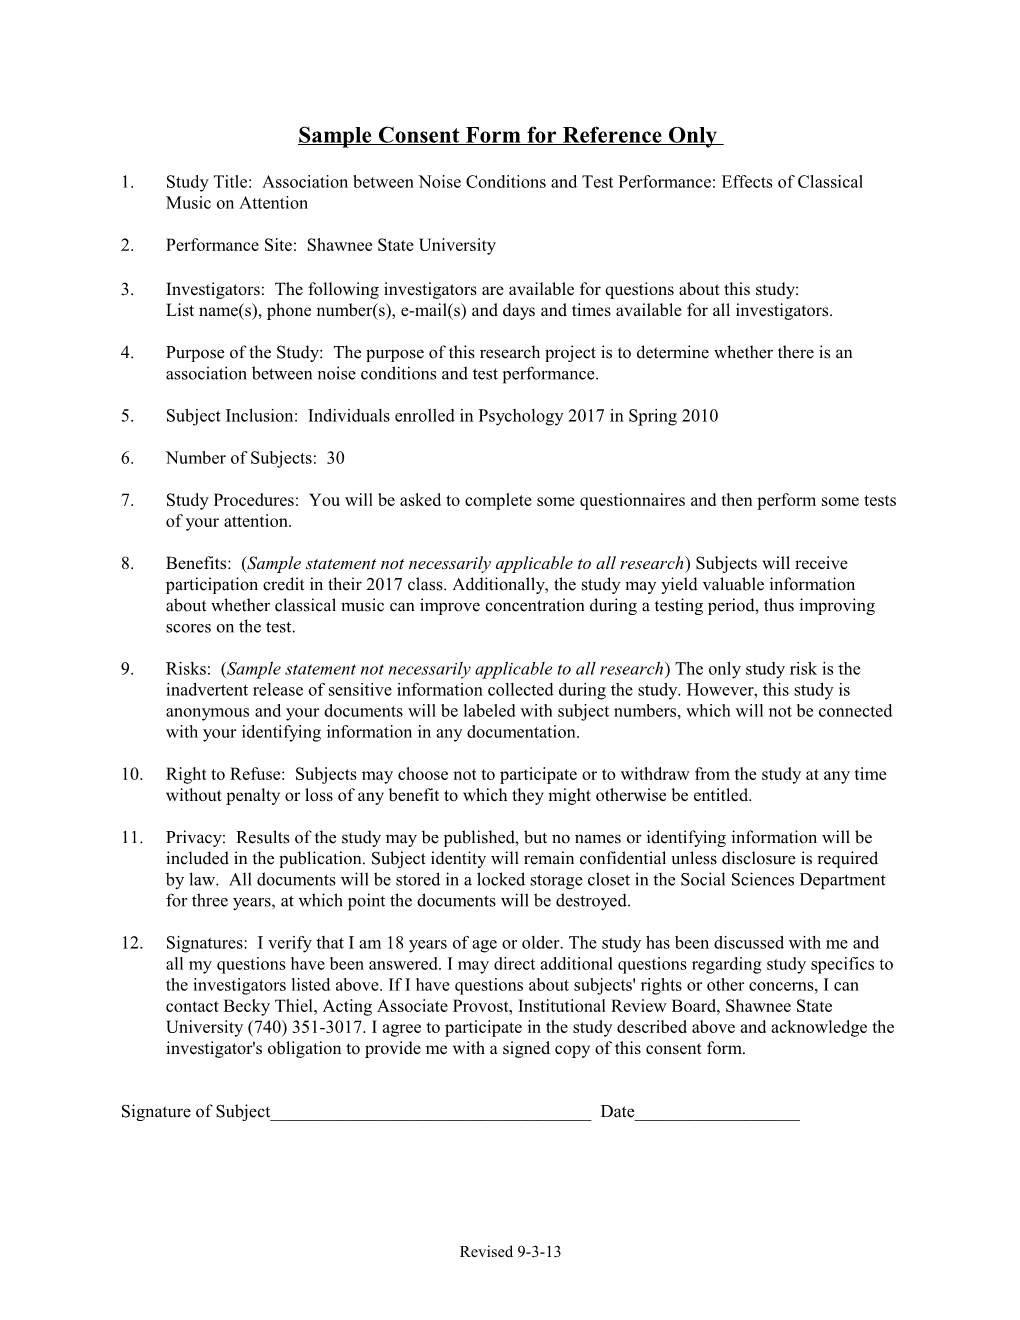 Sample Consent Form for Reference Only